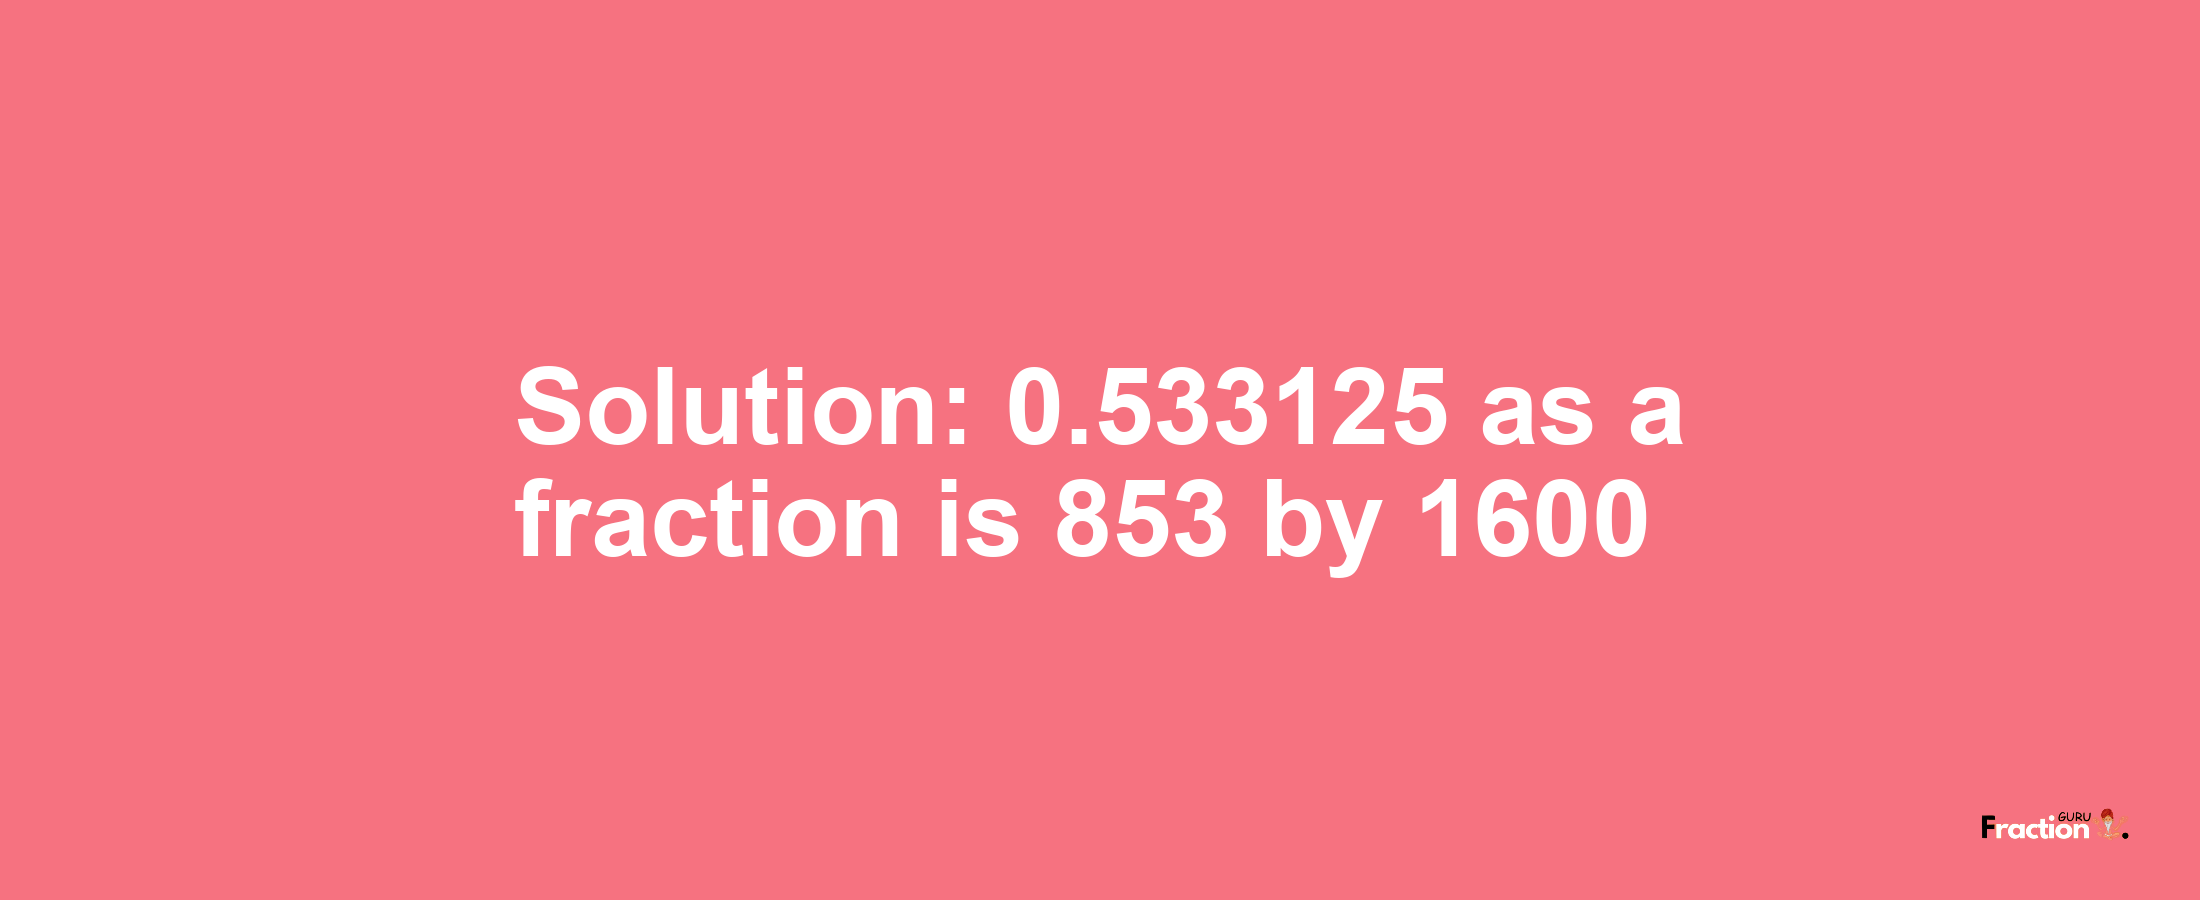 Solution:0.533125 as a fraction is 853/1600